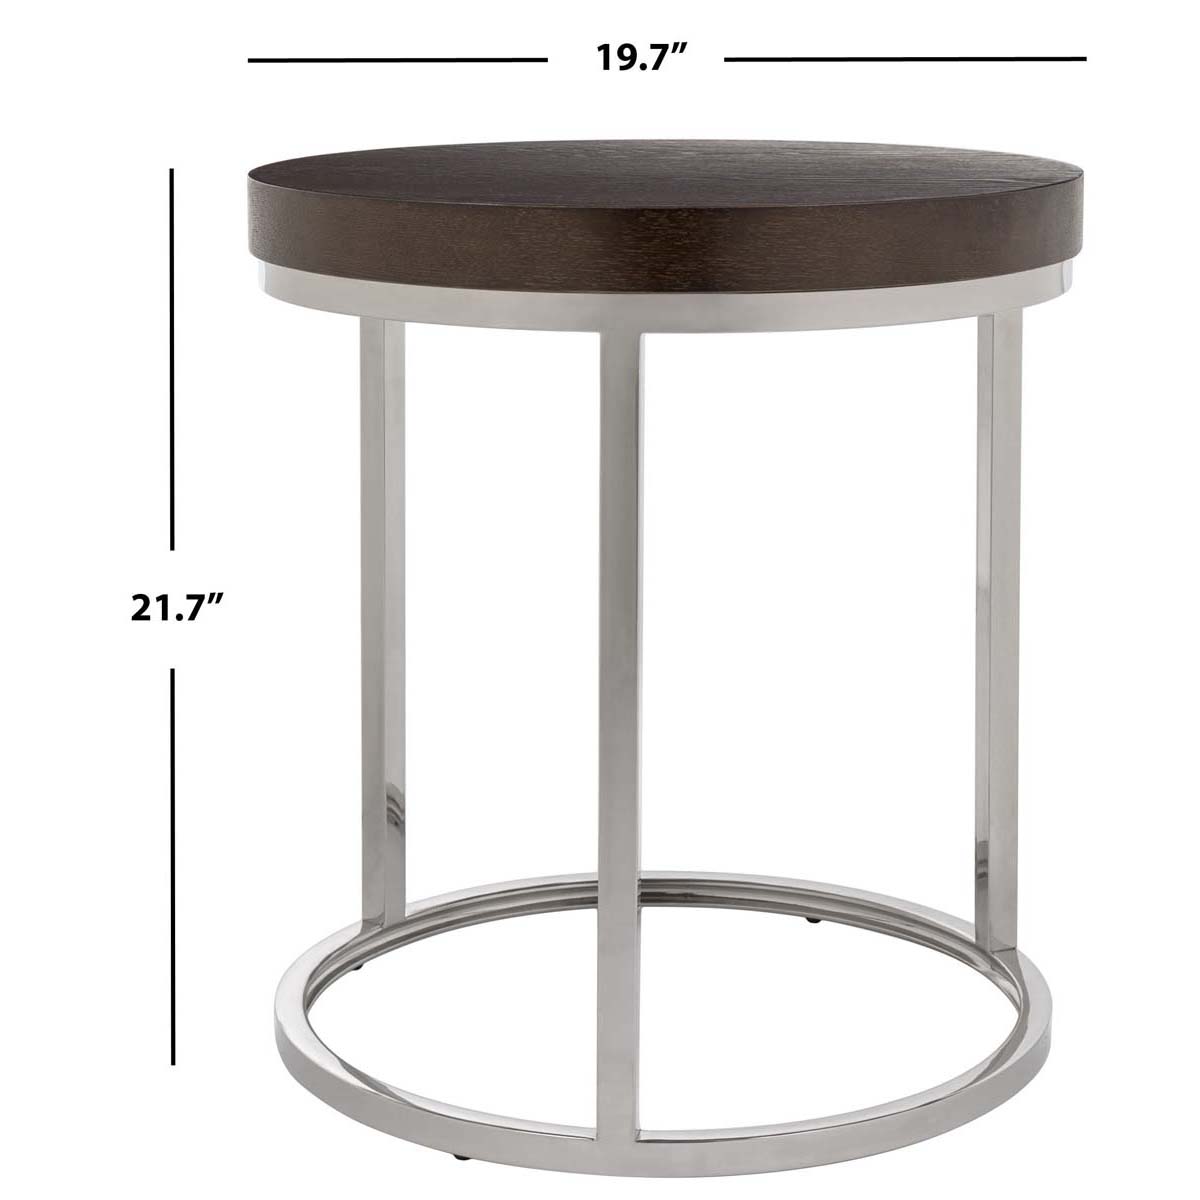 Safavieh Couture Turner Black Glass Top Round End Table - Black